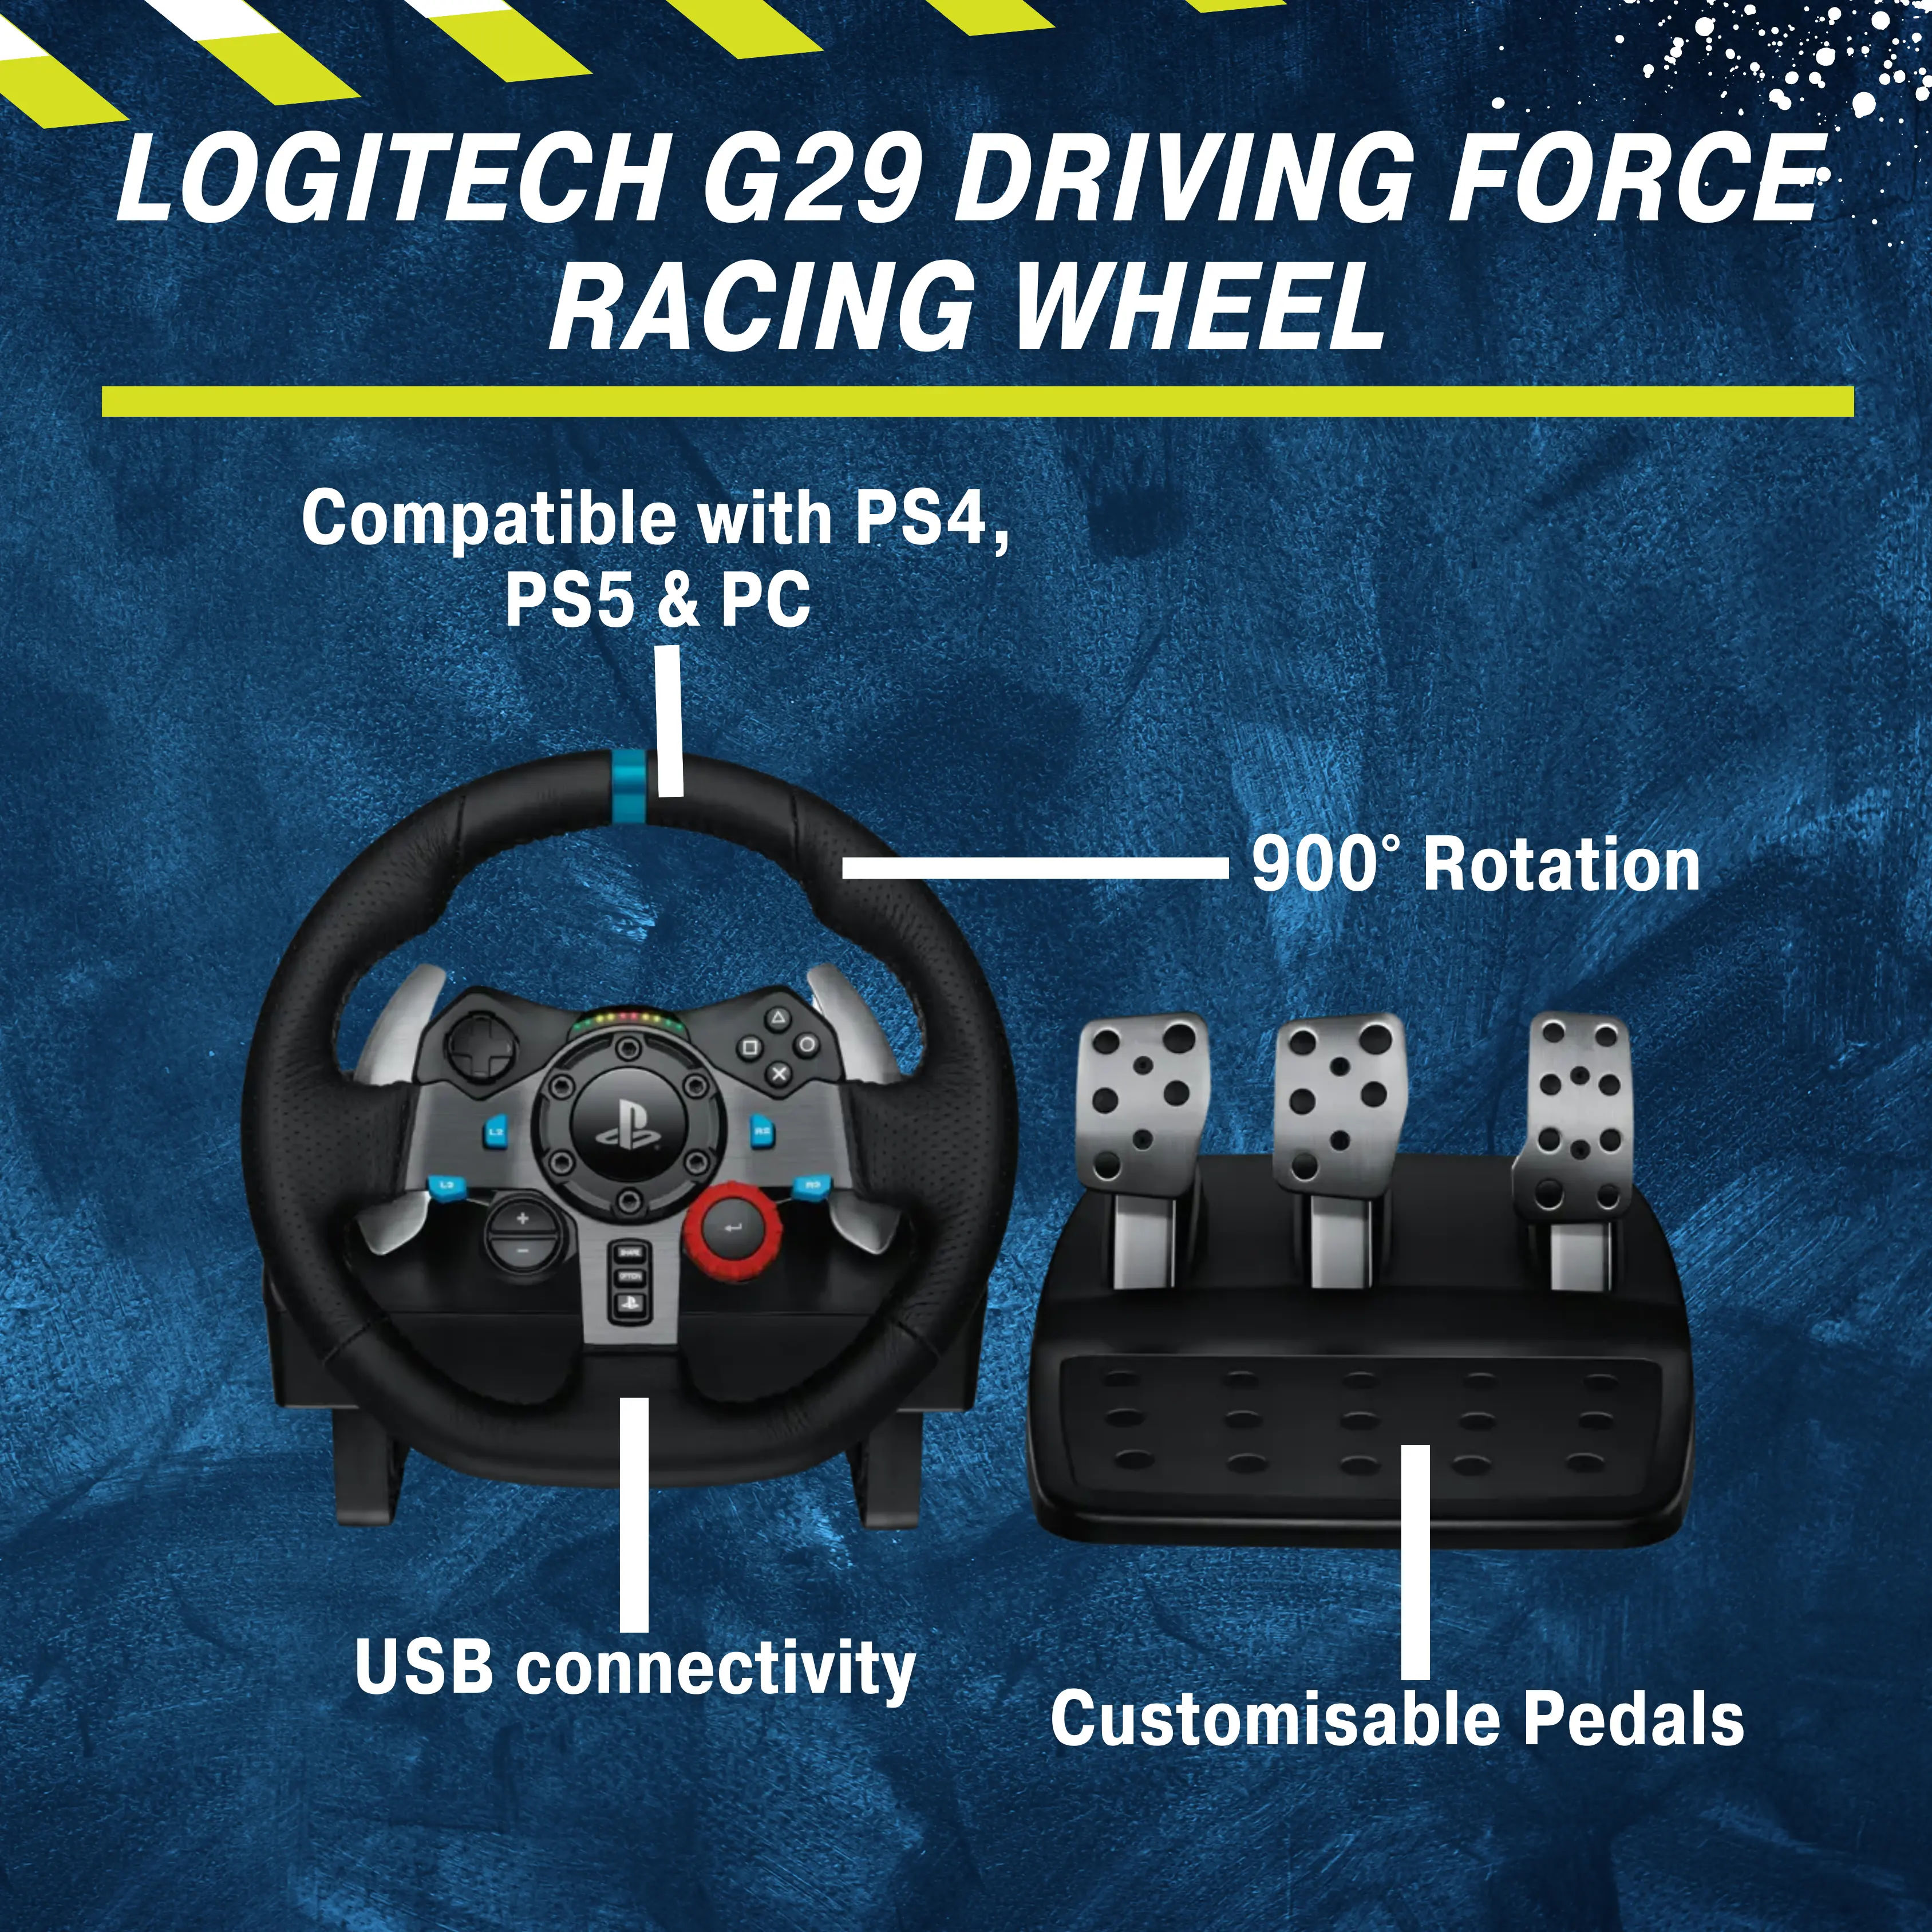 This is an image of Logitech G29 Driving Force Racing Wheel on rent offerred by SharePal.in